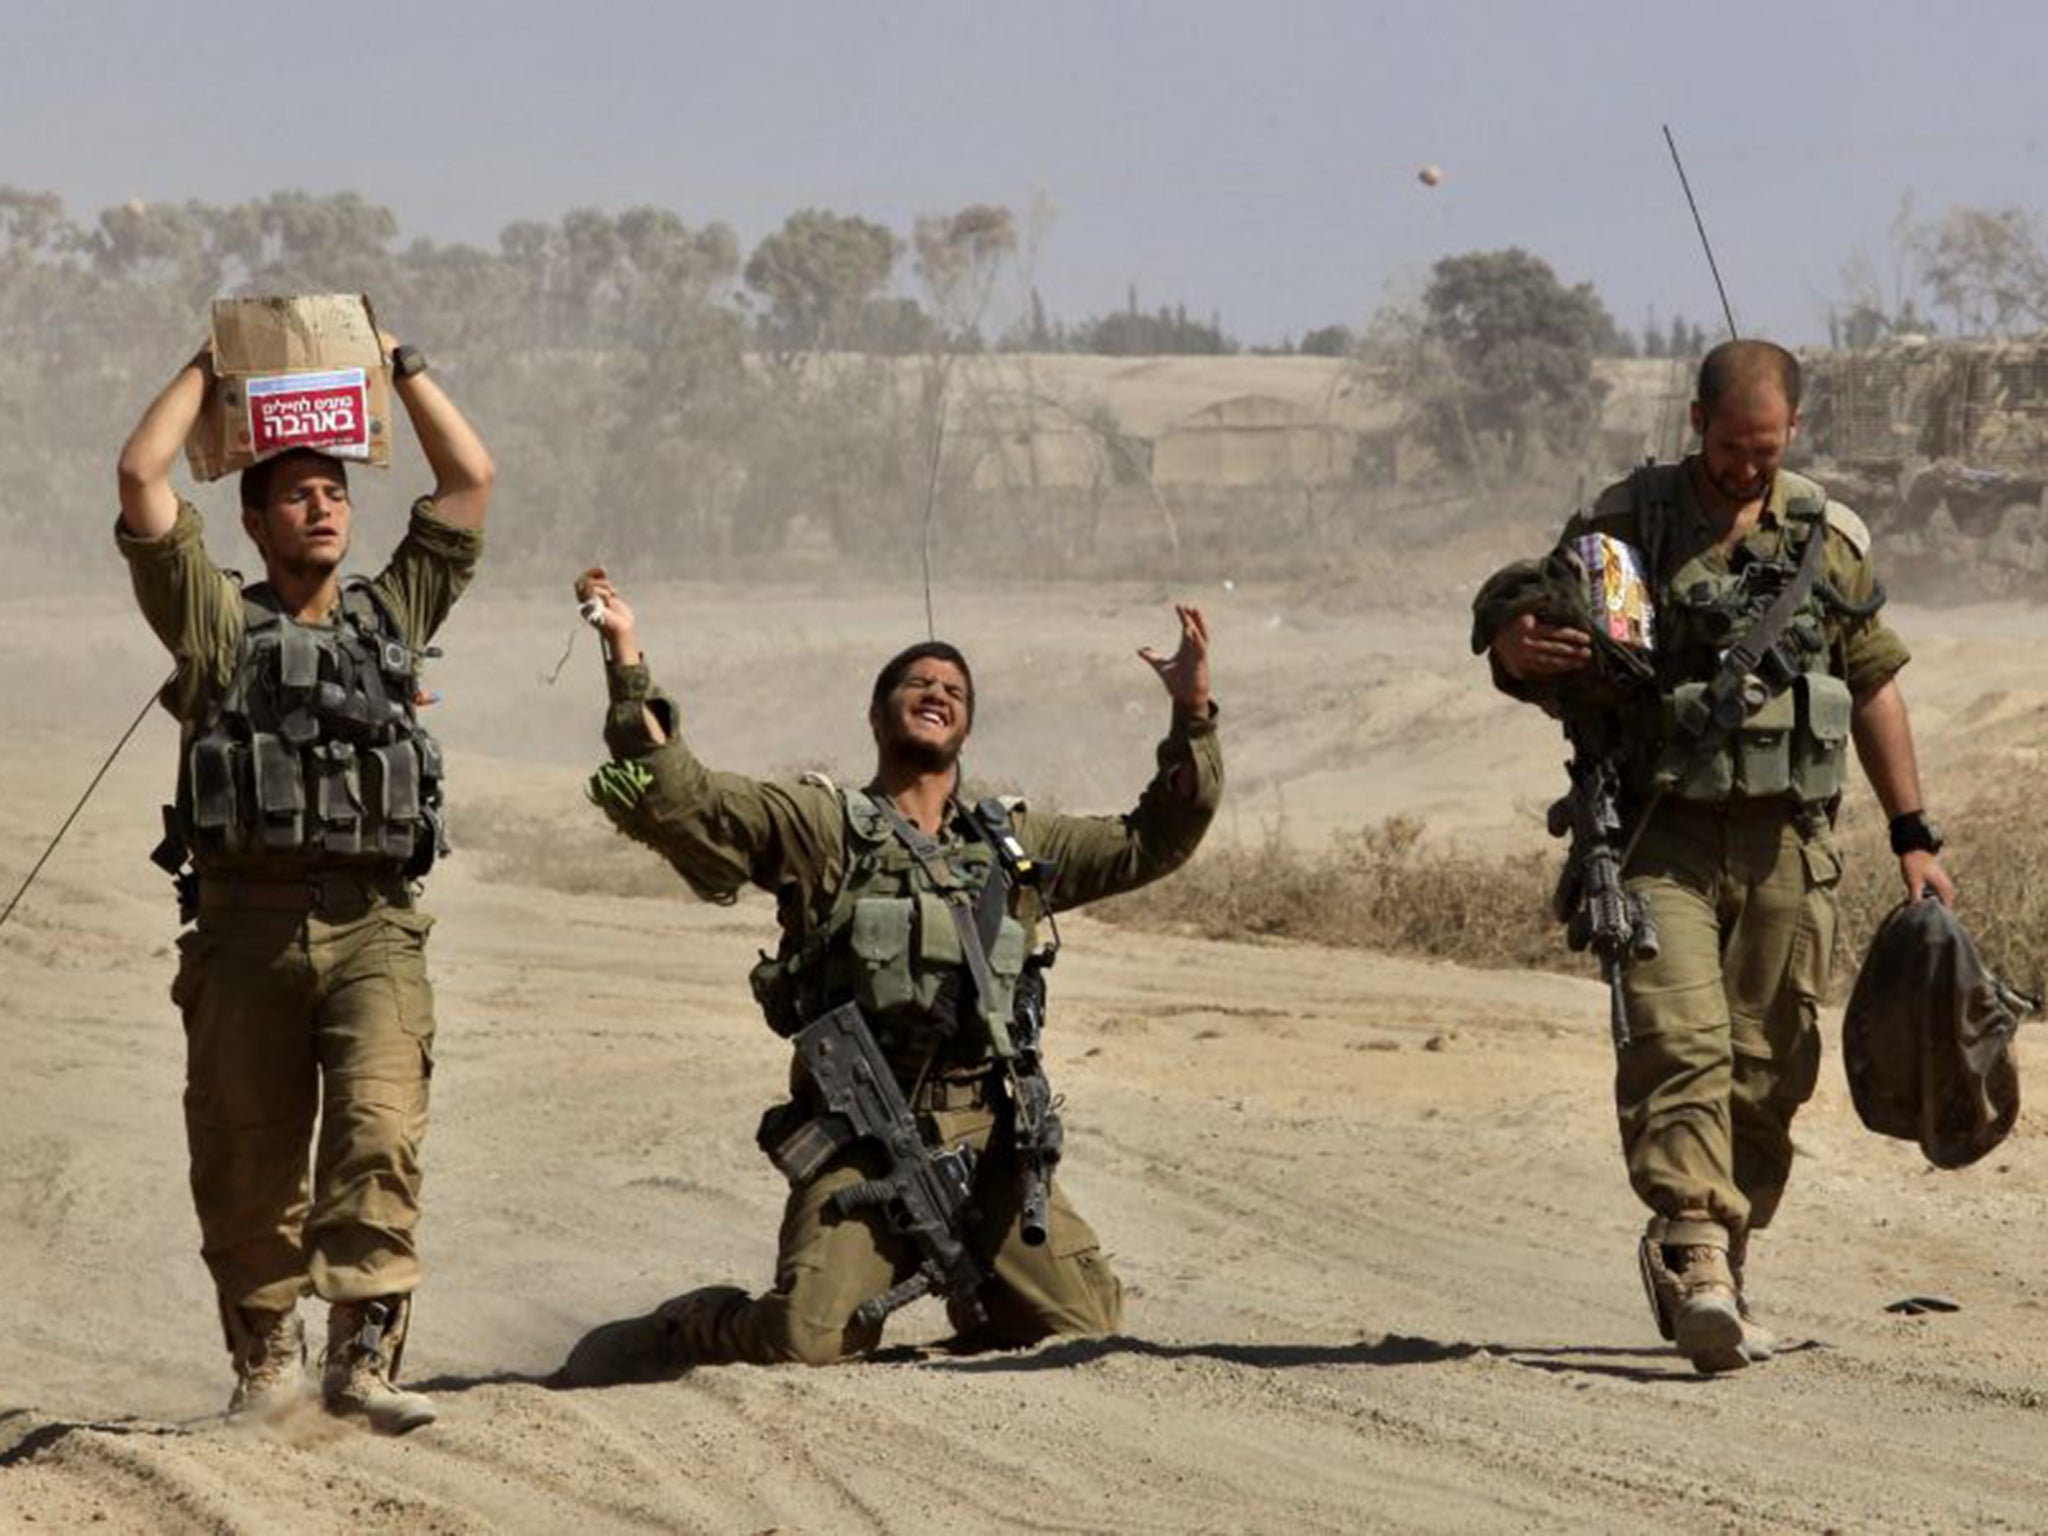 An Israeli soldier gestures in relief after returning from the Gaza Strip during the 2014 war